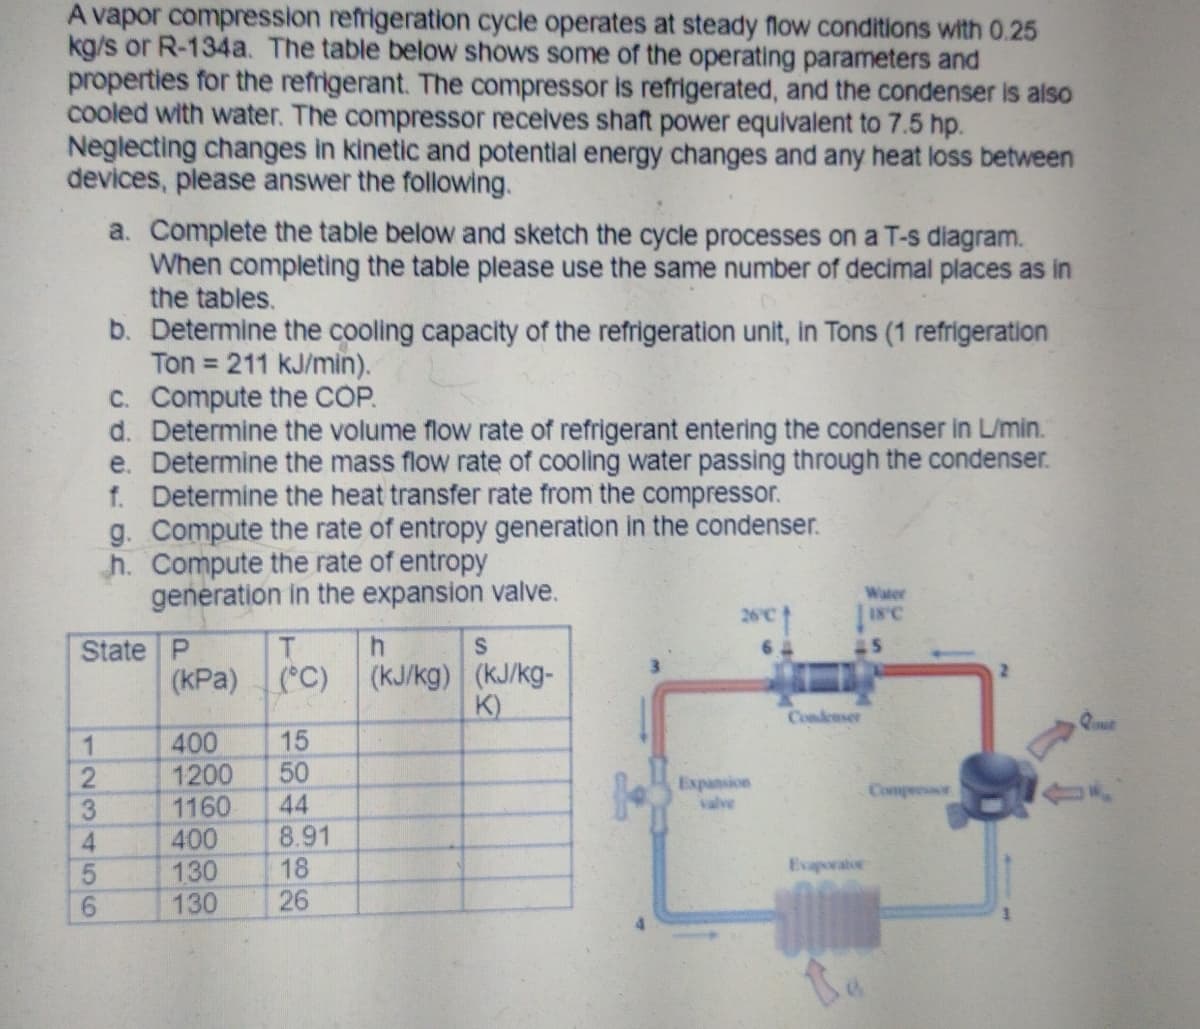 A vapor compression refrigeration cycle operates at steady flow conditions with 0.25
kg/s or R-134a. The table below shows some of the operating parameters and
properties for the refrigerant. The compressor is refrigerated, and the condenser is also
cooled with water. The compressor receives shaft power equivalent to 7.5 hp.
Neglecting changes in kinetic and potential energy changes and any heat loss between
devices, please answer the following.
a. Complete the table below and sketch the cycle processes on a T-s diagram.
When completing the table please use the same number of decimal places as in
the tables.
123456
b. Determine the cooling capacity of the refrigeration unit, in Tons (1 refrigeration
Ton = 211 kJ/min).
c. Compute the COP.
d. Determine the volume flow rate of refrigerant entering the condenser in L/min.
e. Determine the mass flow rate of cooling water passing through the condenser.
f. Determine the heat transfer rate from the compressor.
g. Compute the rate of entropy generation in the condenser.
h. Compute the rate of entropy
generation in the expansion valve.
State P
T
(kPa) (°C)
15
400
1200 50
1160 44
400 8.91
130
18
130 26
h
(kJ/kg)
S
(kJ/kg-
K)
26°C
Expansion
64
Water